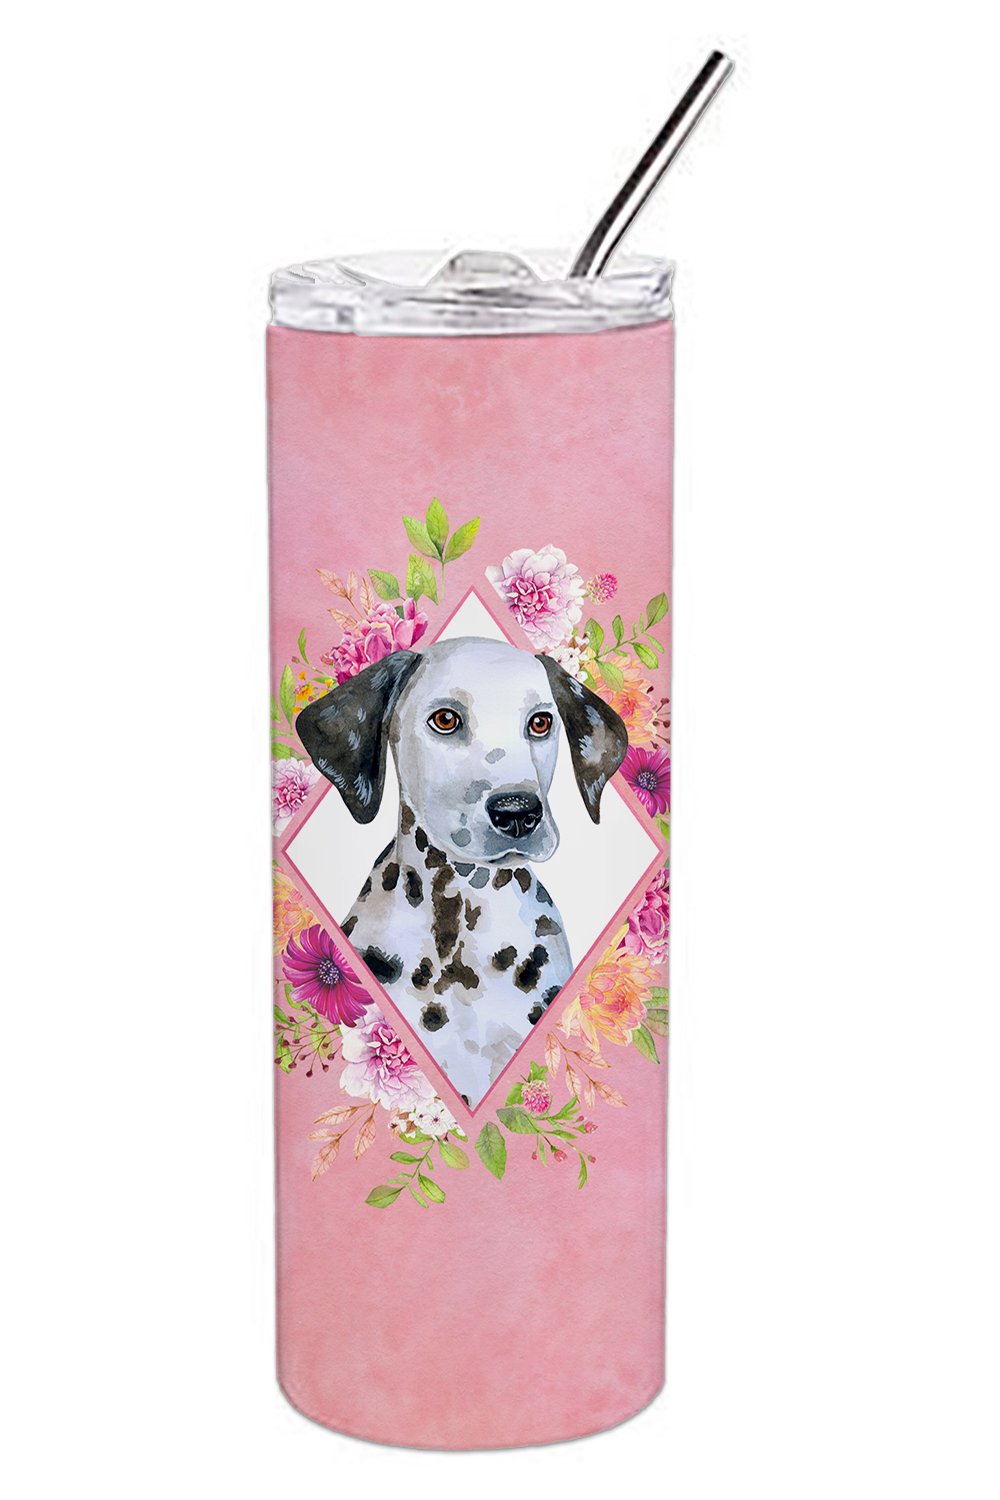 Dalmatian Puppy Pink Flowers Double Walled Stainless Steel 20 oz Skinny Tumbler CK4136TBL20 by Caroline's Treasures